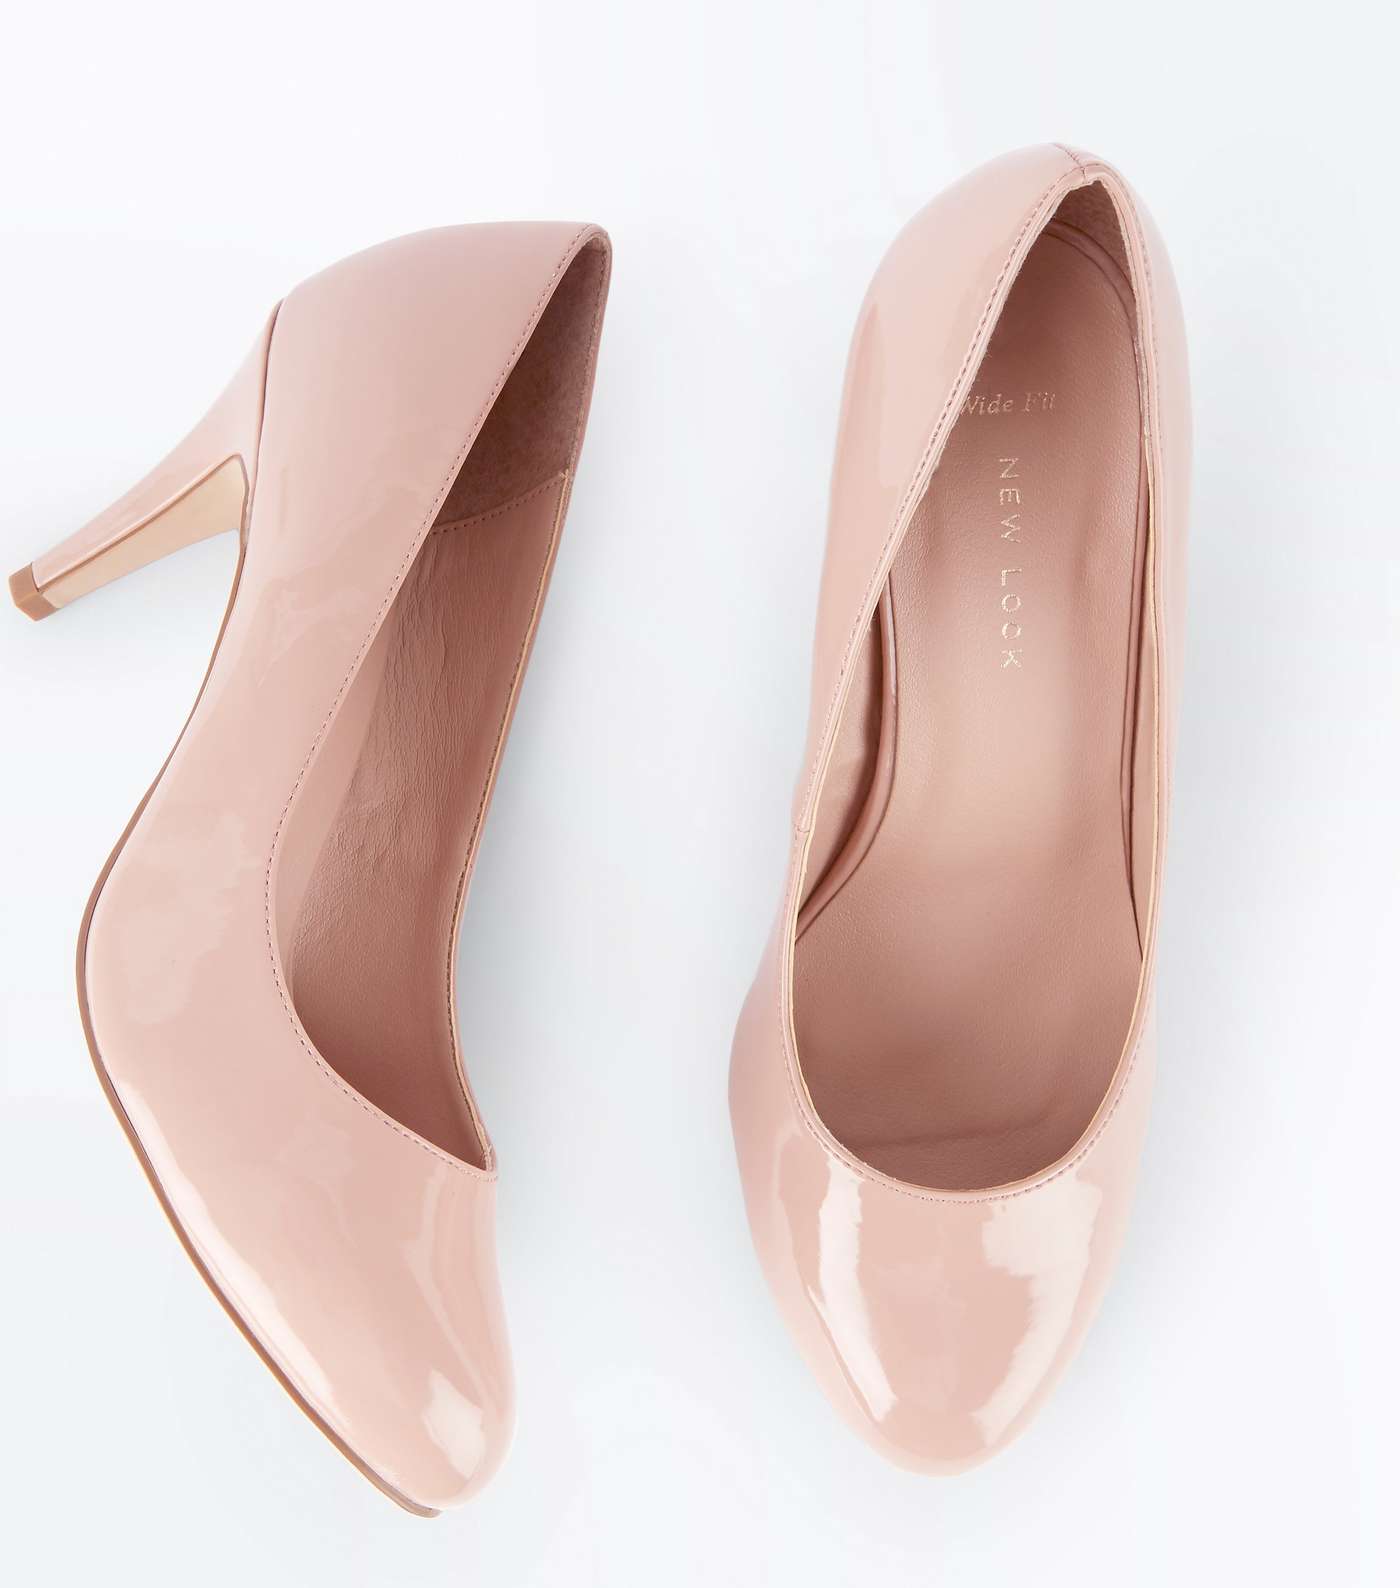 Wide Fit Nude Patent Round Toe Court Shoes Image 4